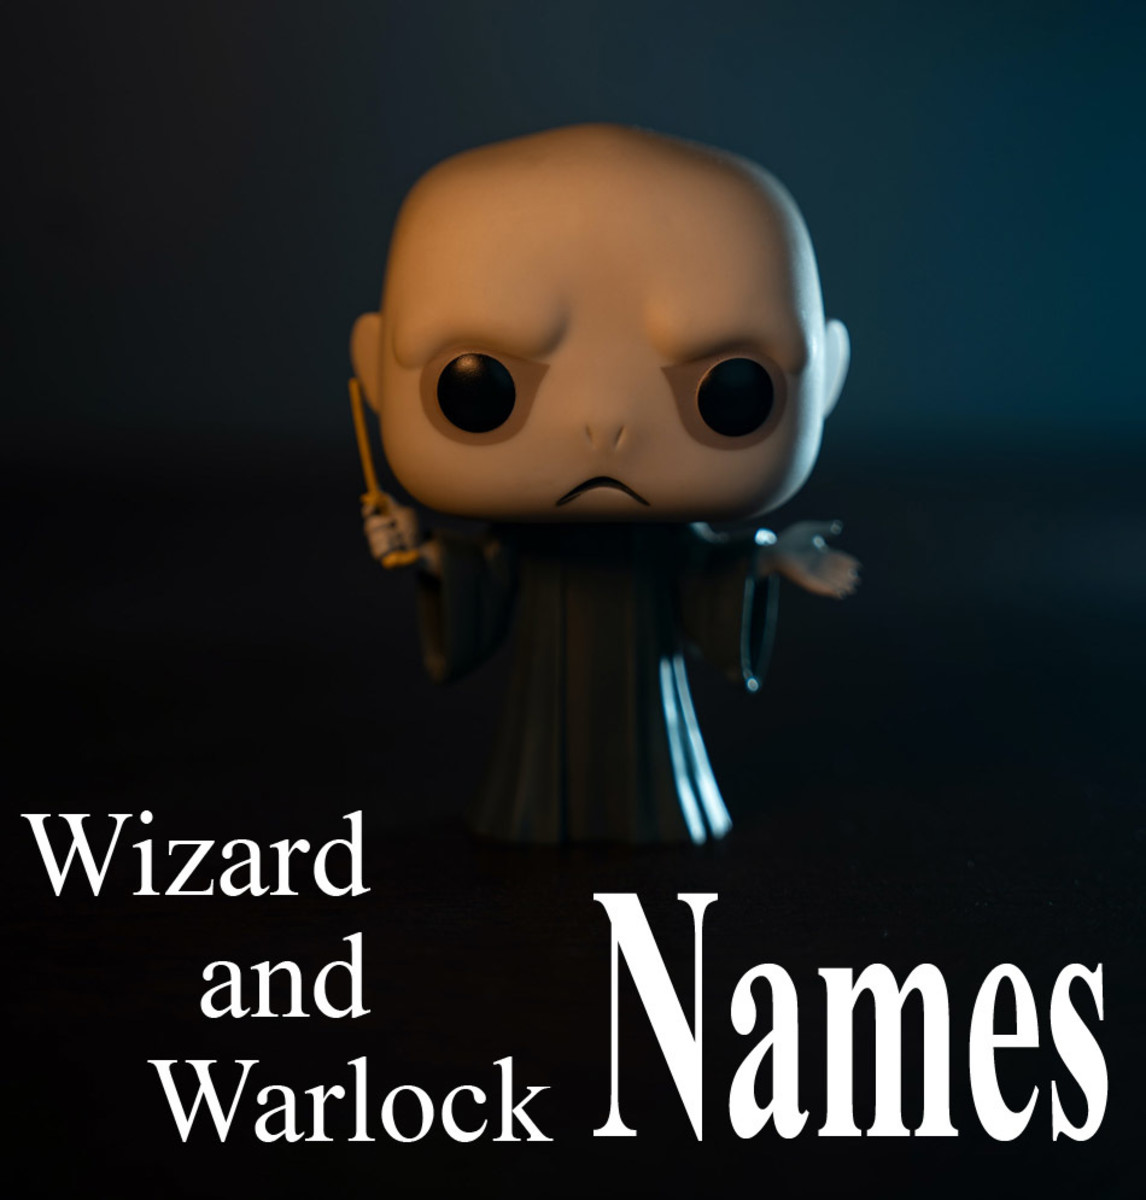 Name a famous wizard